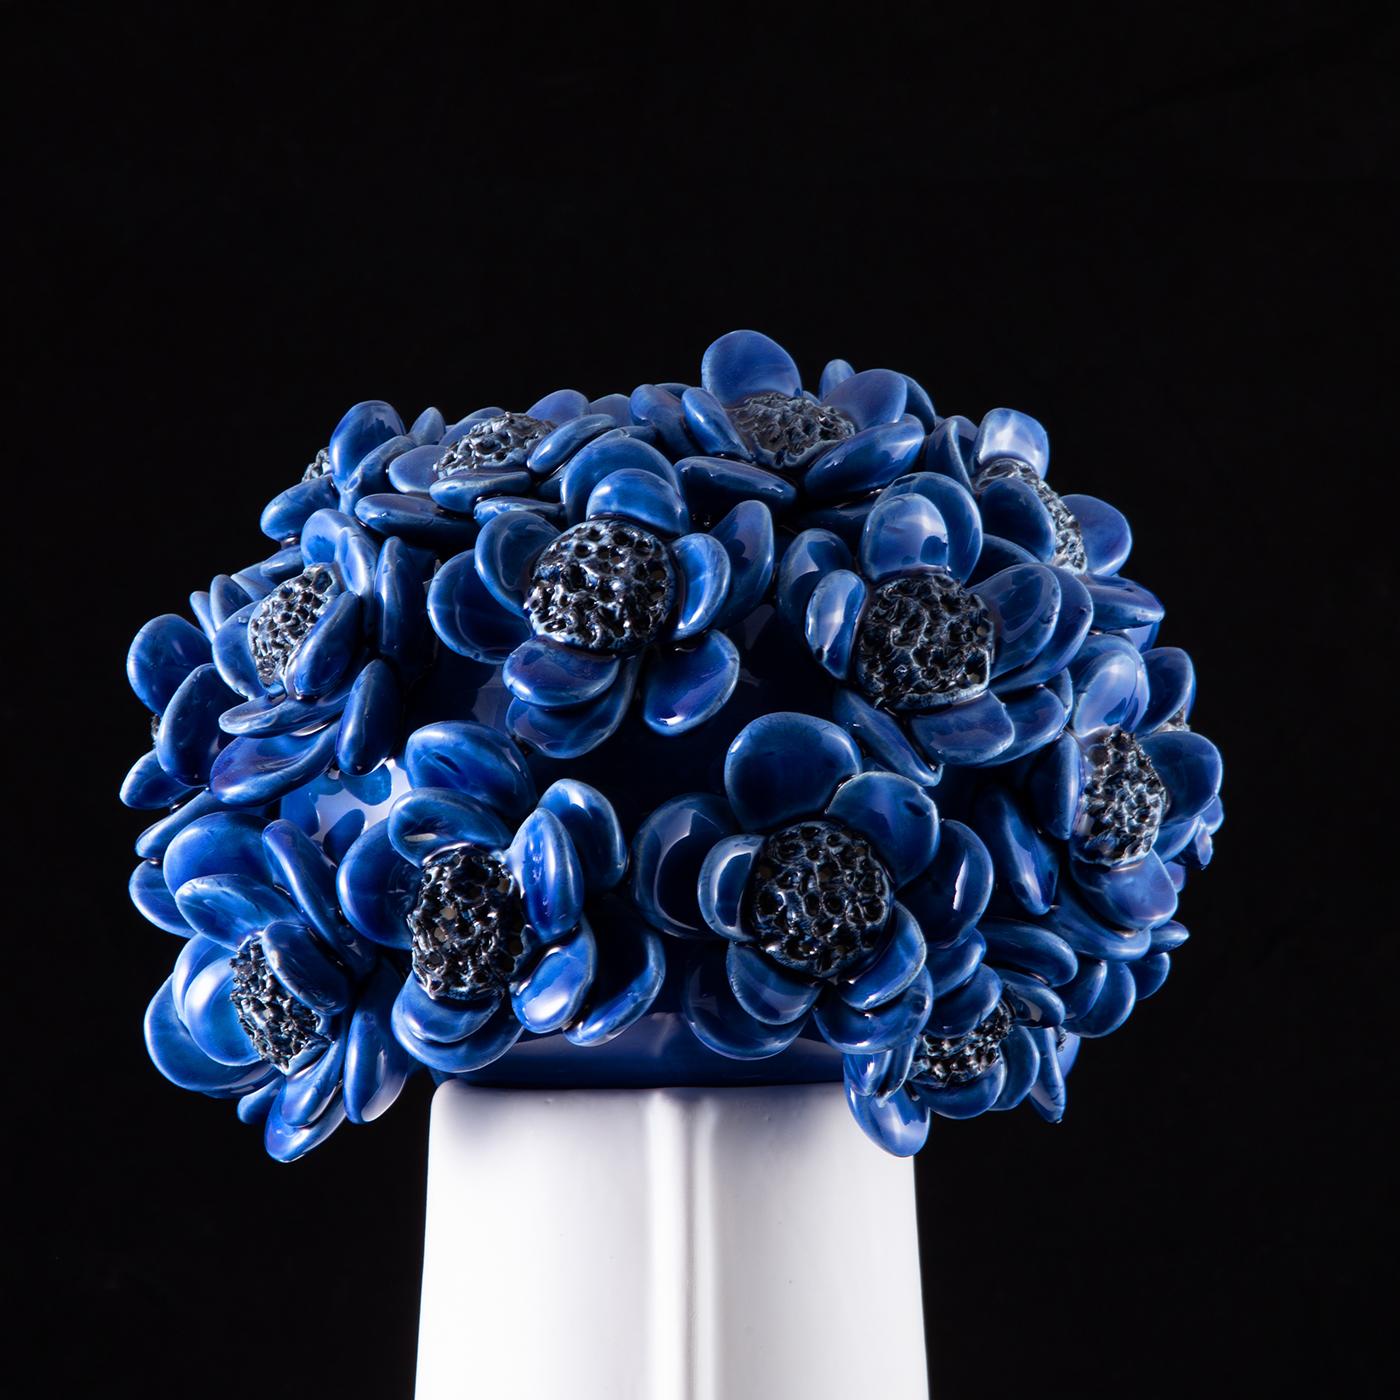 A lid of blossoming deep-blue windflowers states this design's unmistakably decorative value at first glance. The bright-white ceramic body it is set onto sports elegant anthropomorphic traits and conceals a practical storage unit on the inside for